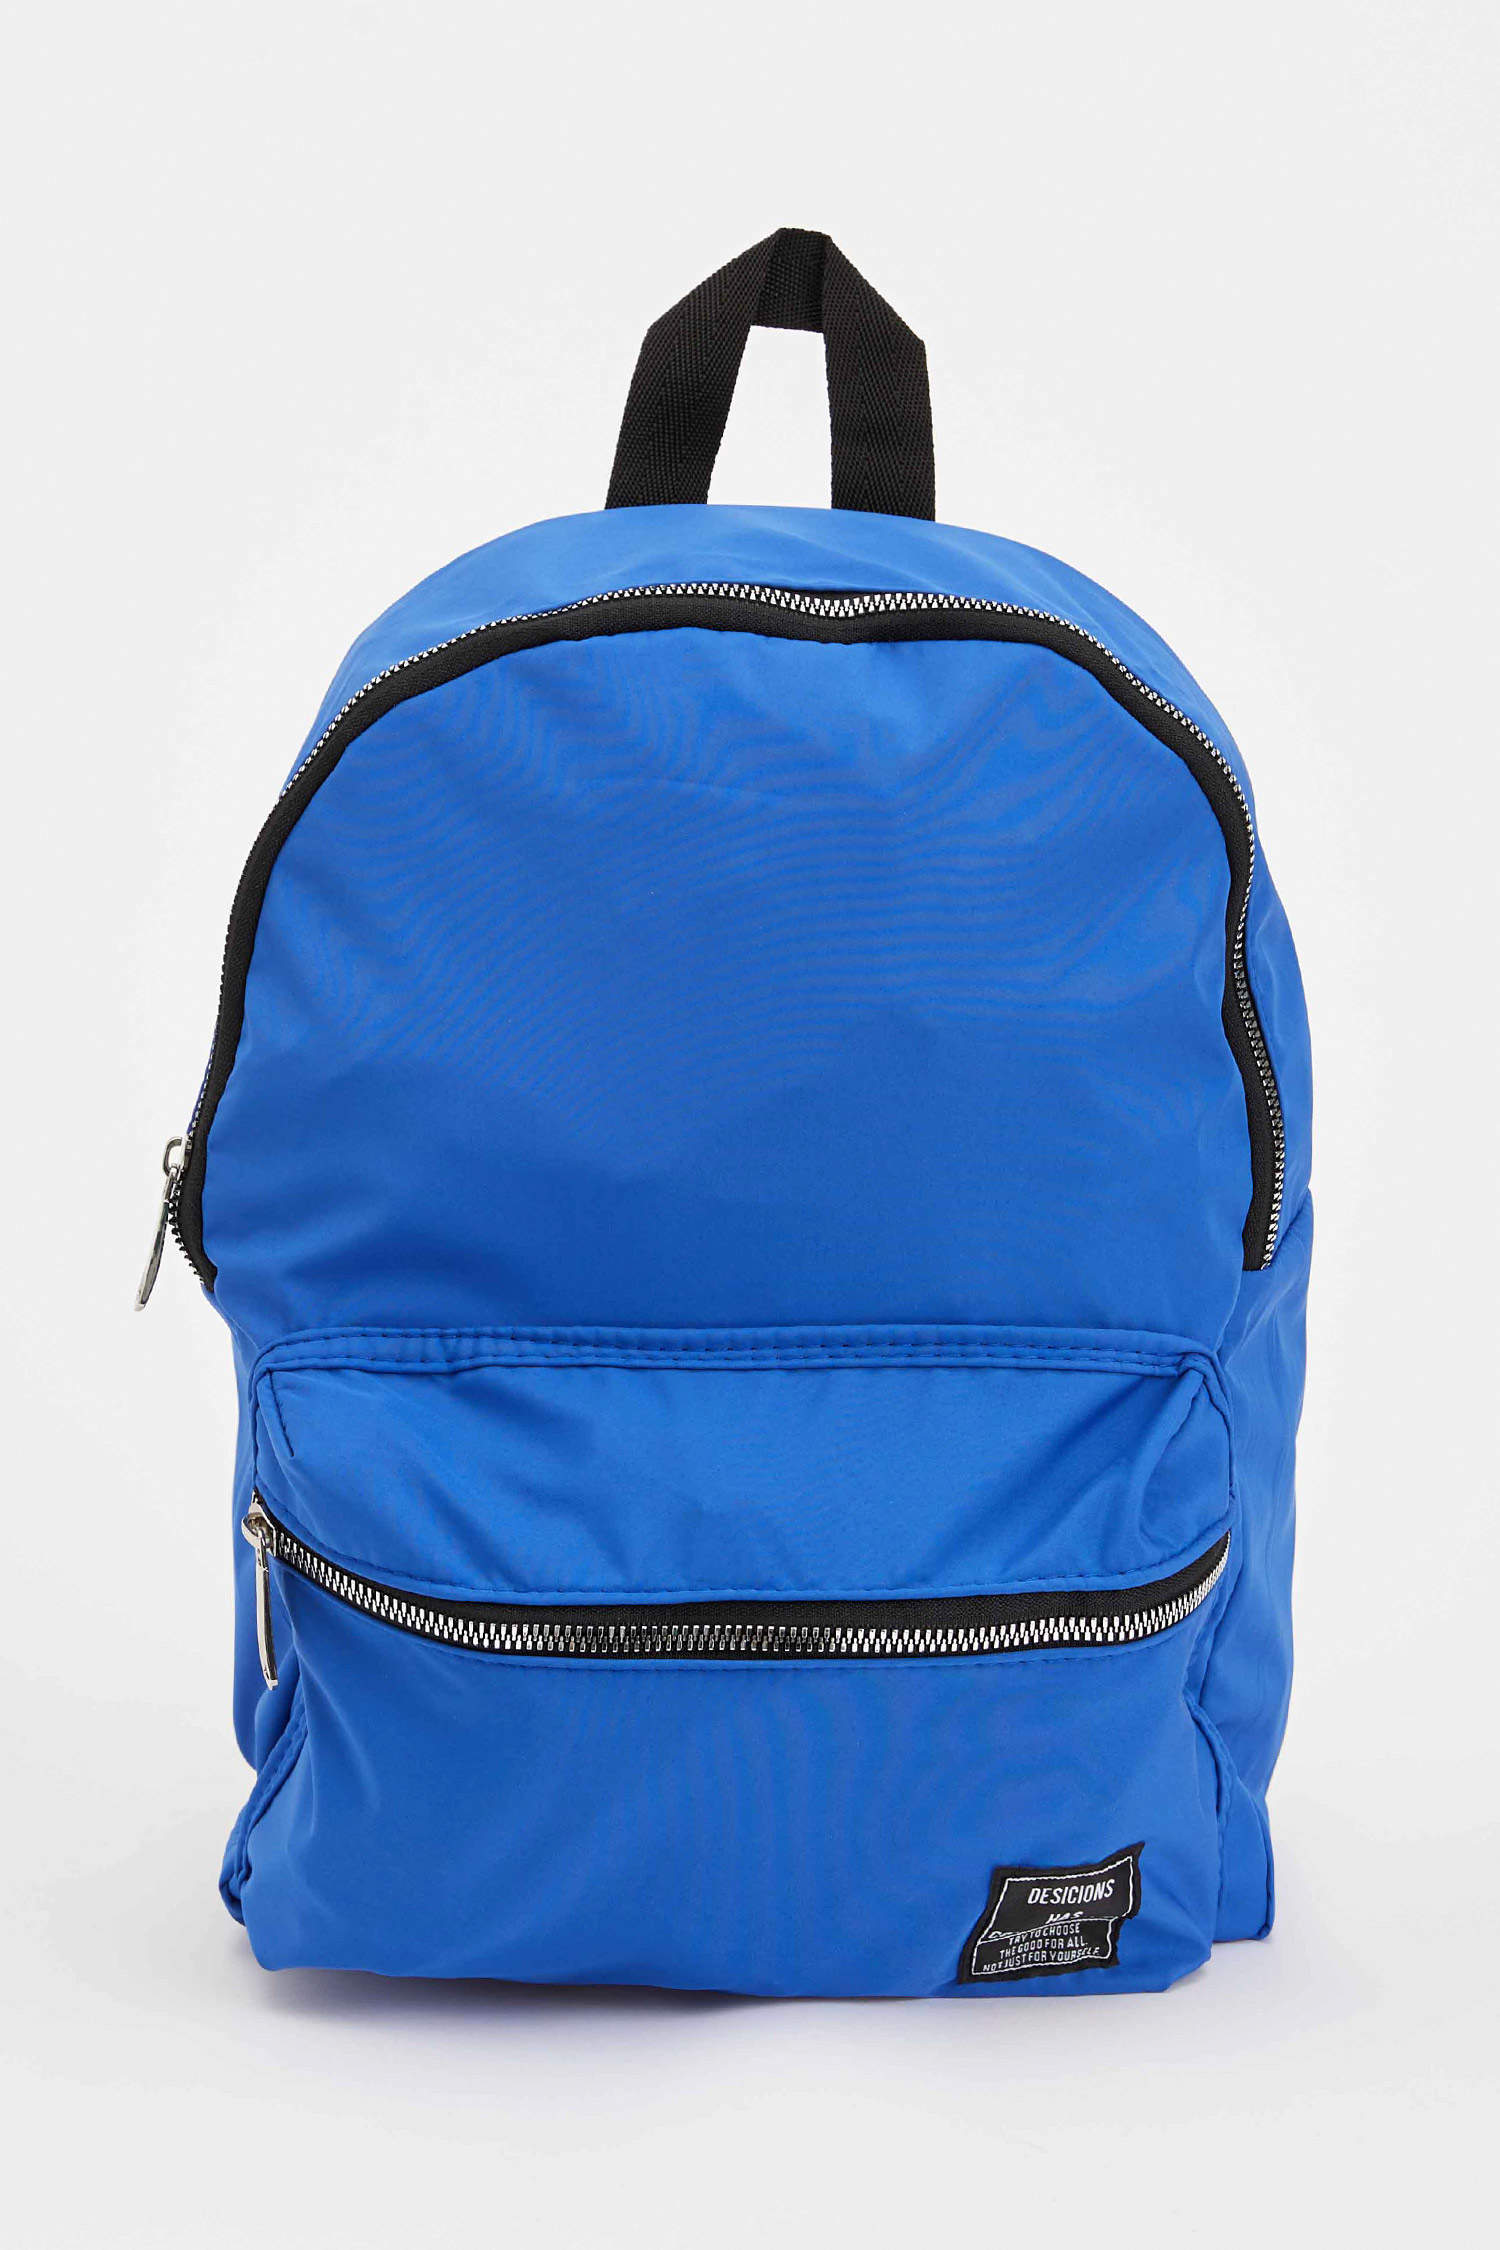 Blue WOMAN Backpack 1219246 | DeFacto